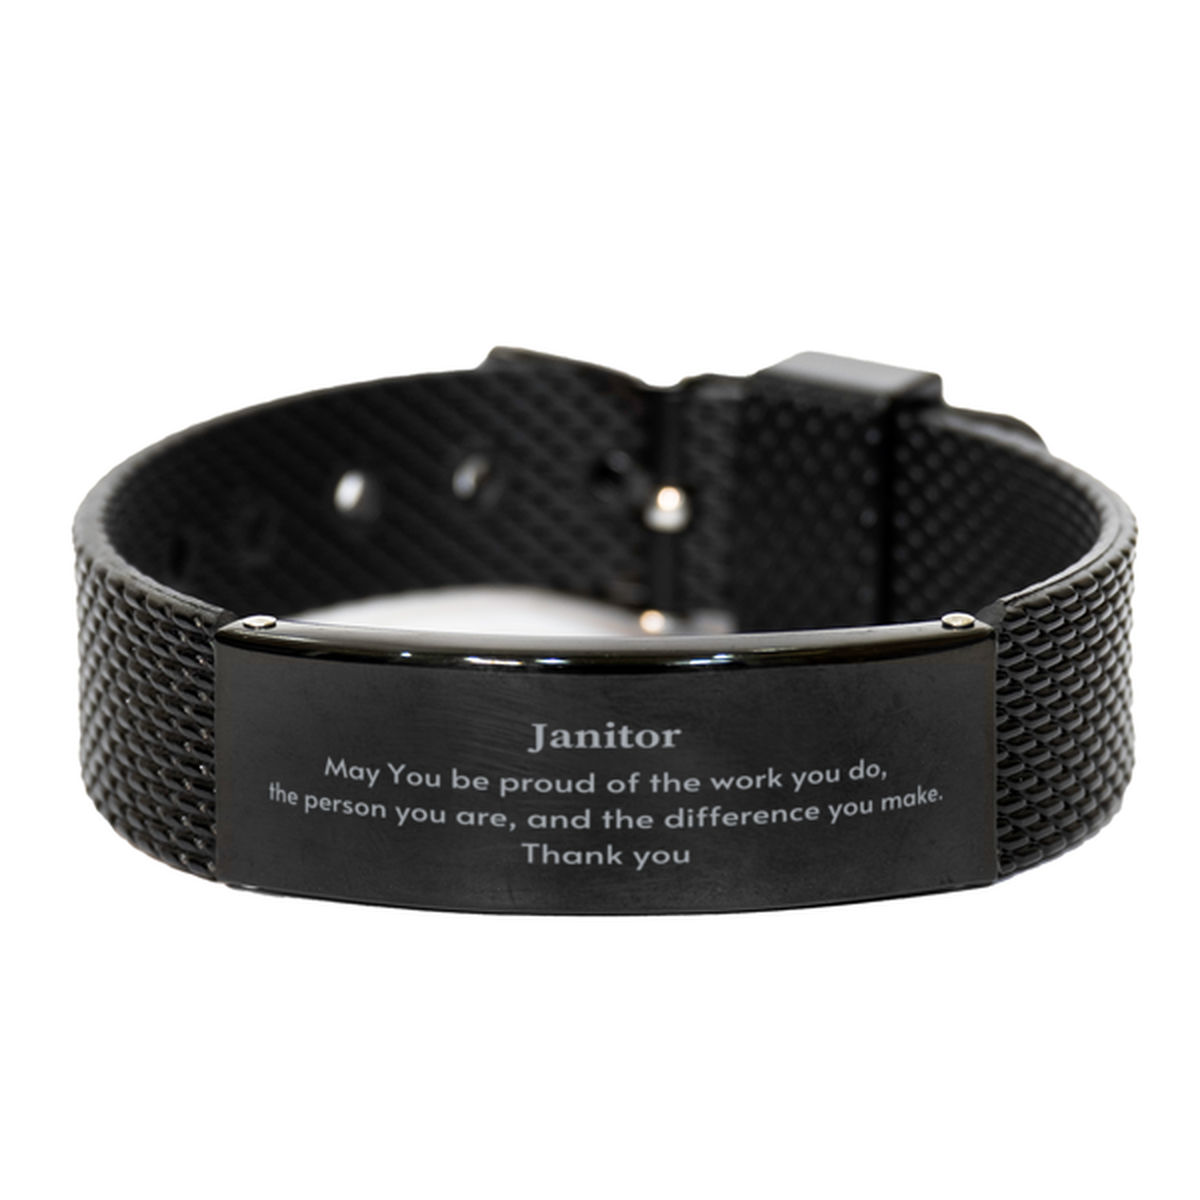 Heartwarming Black Shark Mesh Bracelet Retirement Coworkers Gifts for Janitor, Janitor May You be proud of the work you do, the person you are Gifts for Boss Men Women Friends